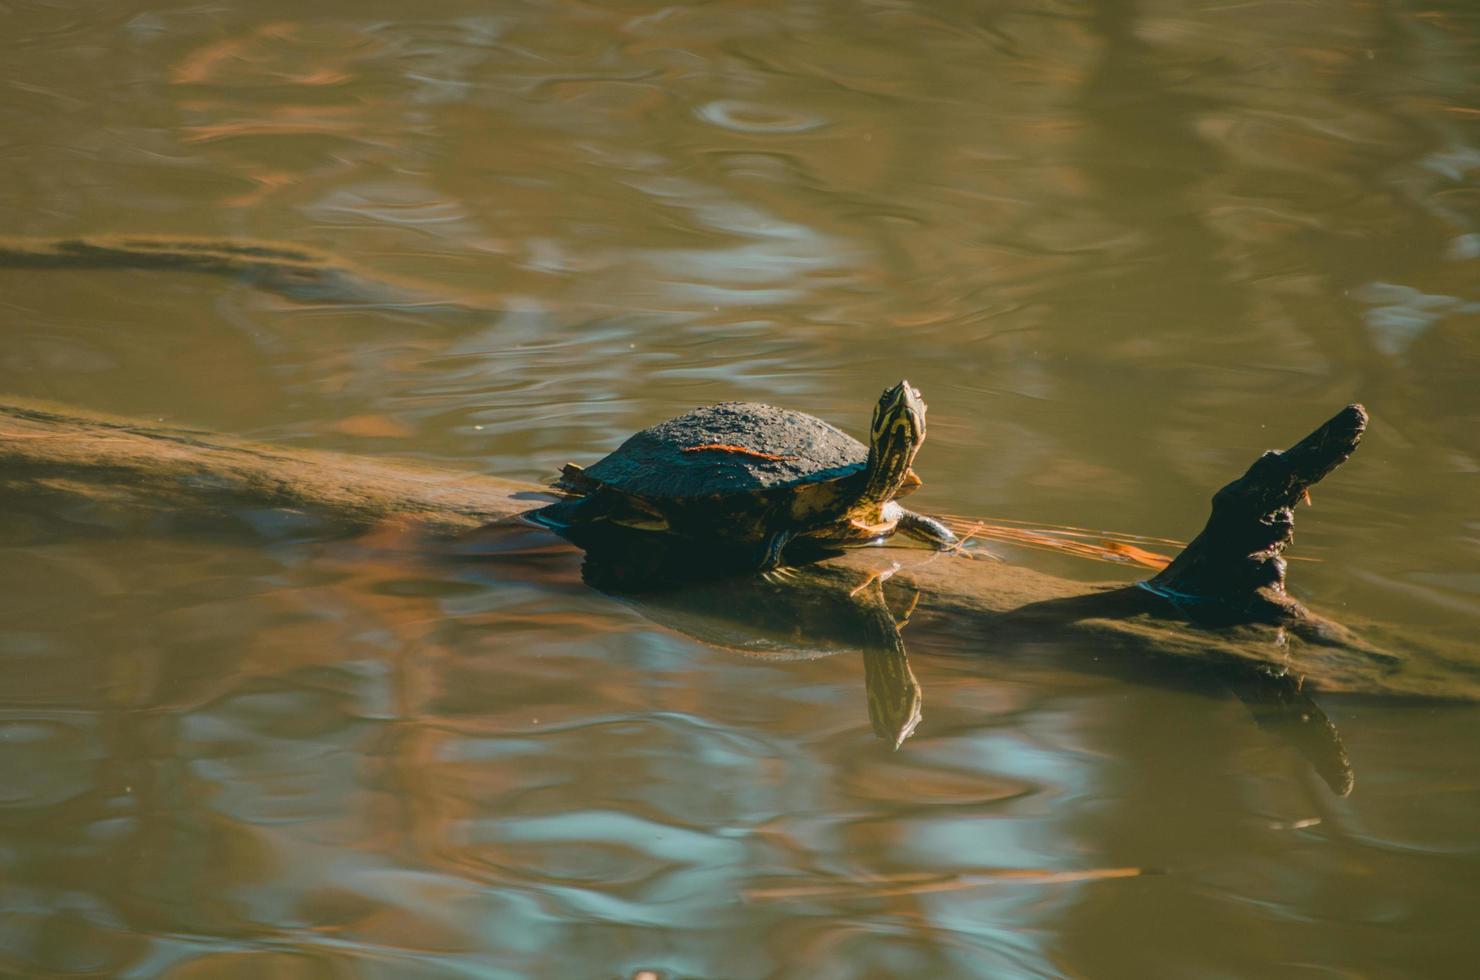 Brown turtle on branch in water photo